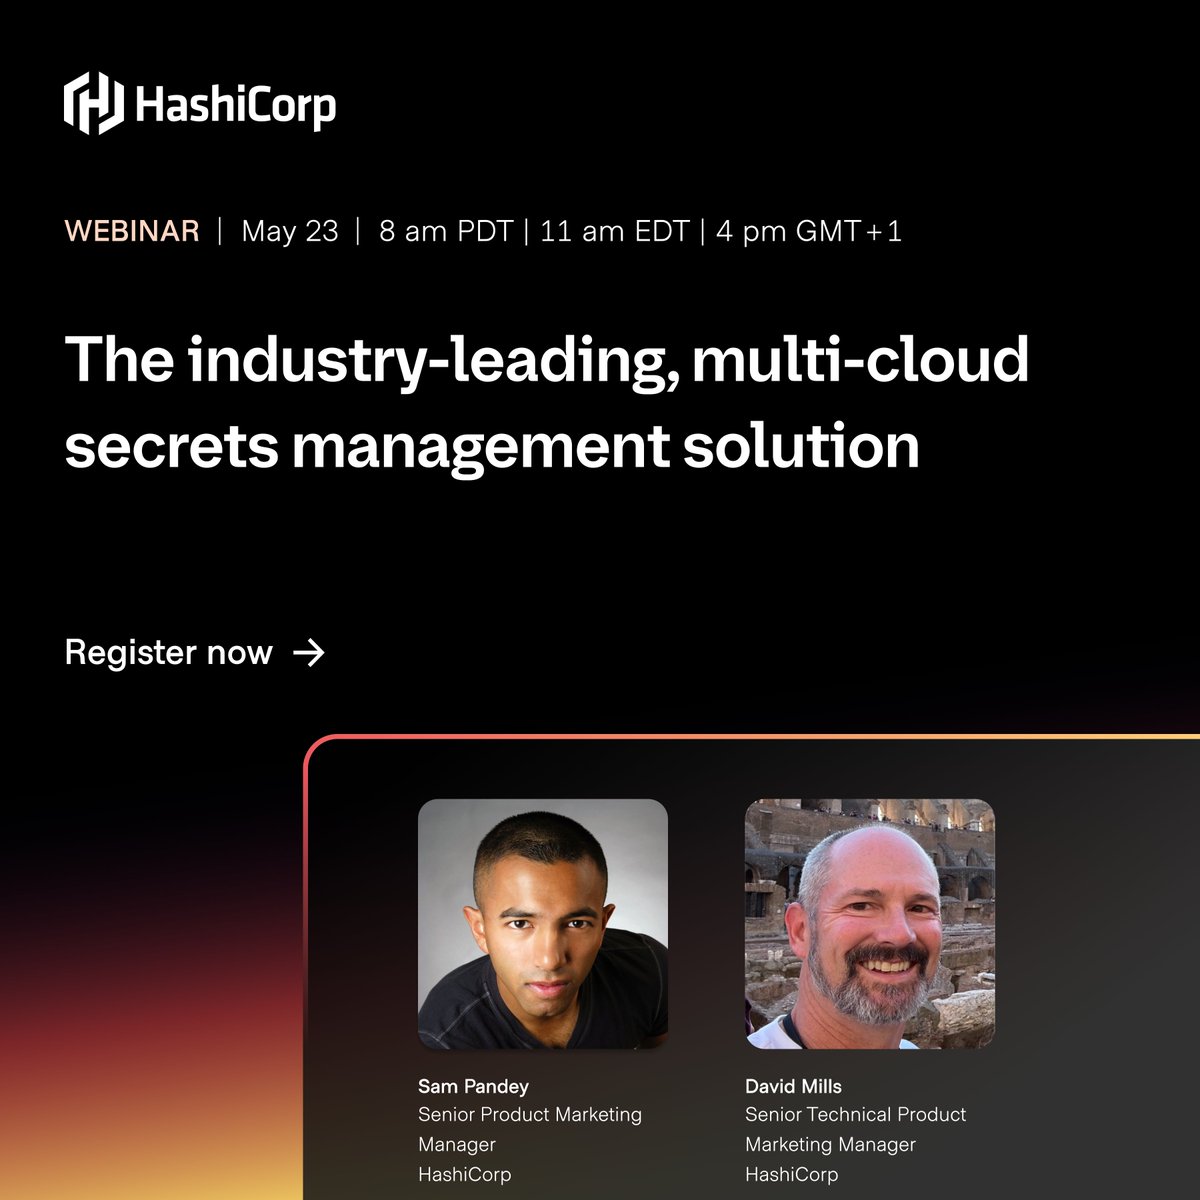 Still considering your secrets management solution? Don't skimp on security - join us next week to discover why our multi-cloud solution is leading the industry. Register today. 🔐 hashi.co/3K2Cf73